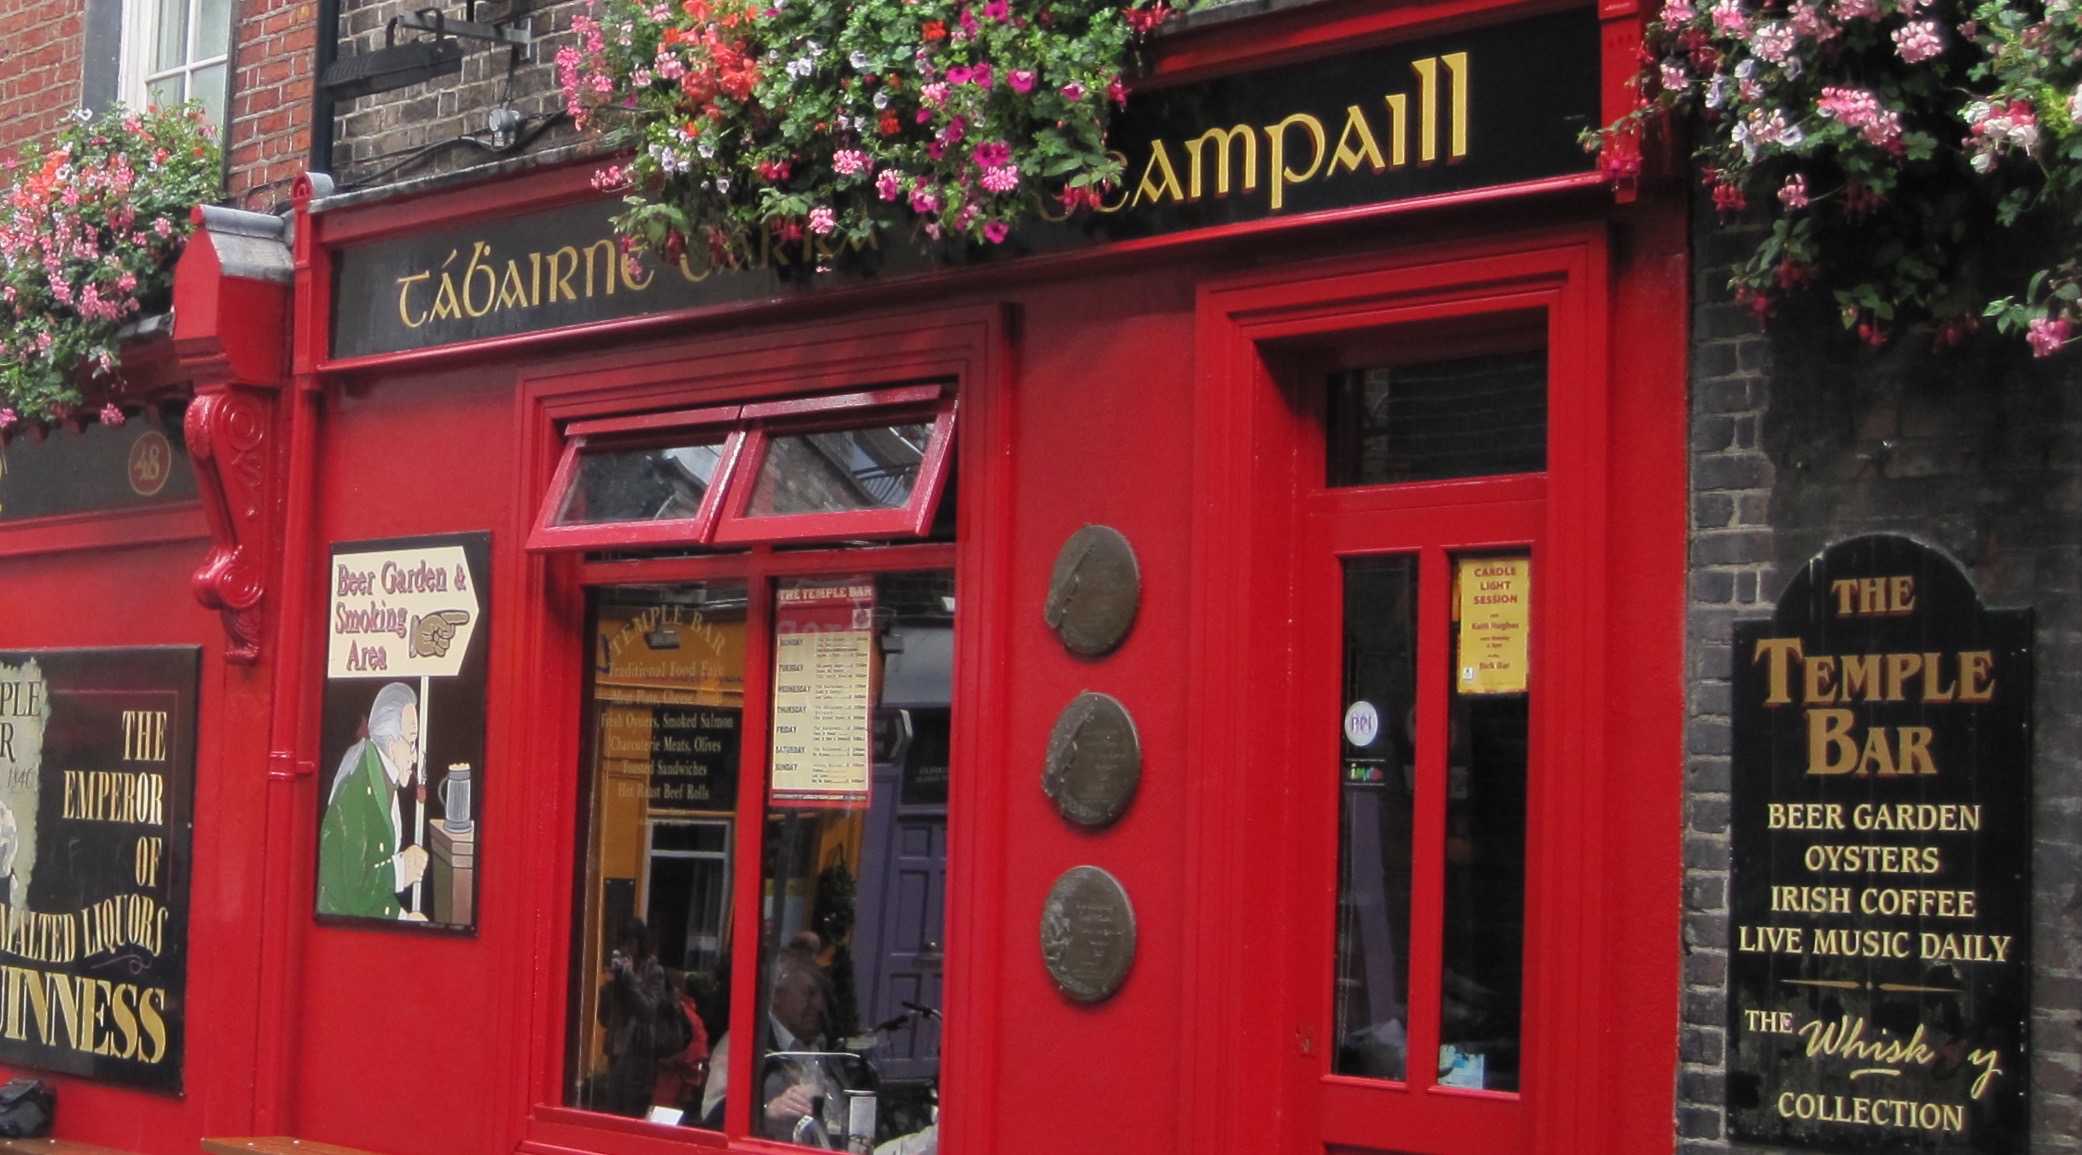 Dublin's famous Temple Bar - what better place to sample Irish beer!